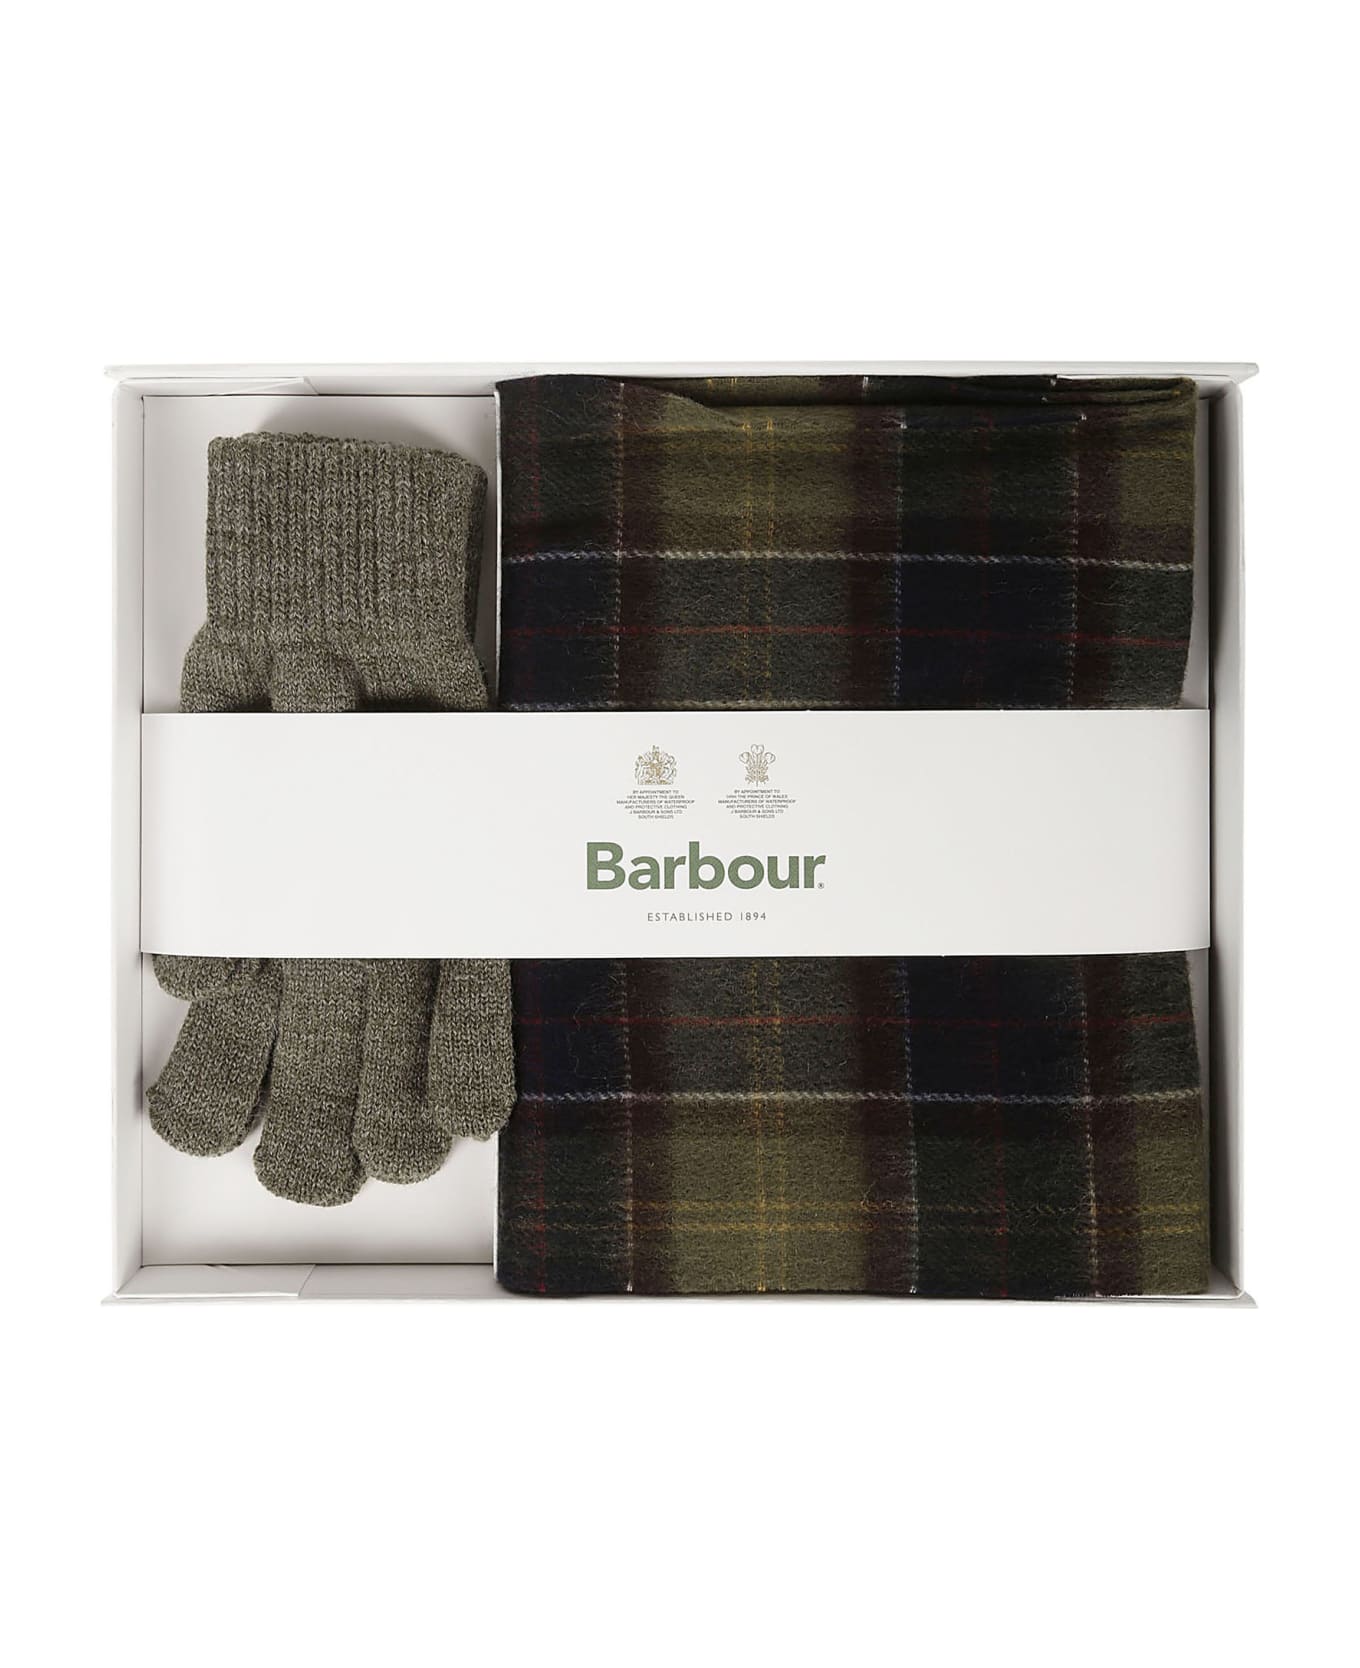 Barbour Tartan Scarf Glove Gift Set - Classic Olive